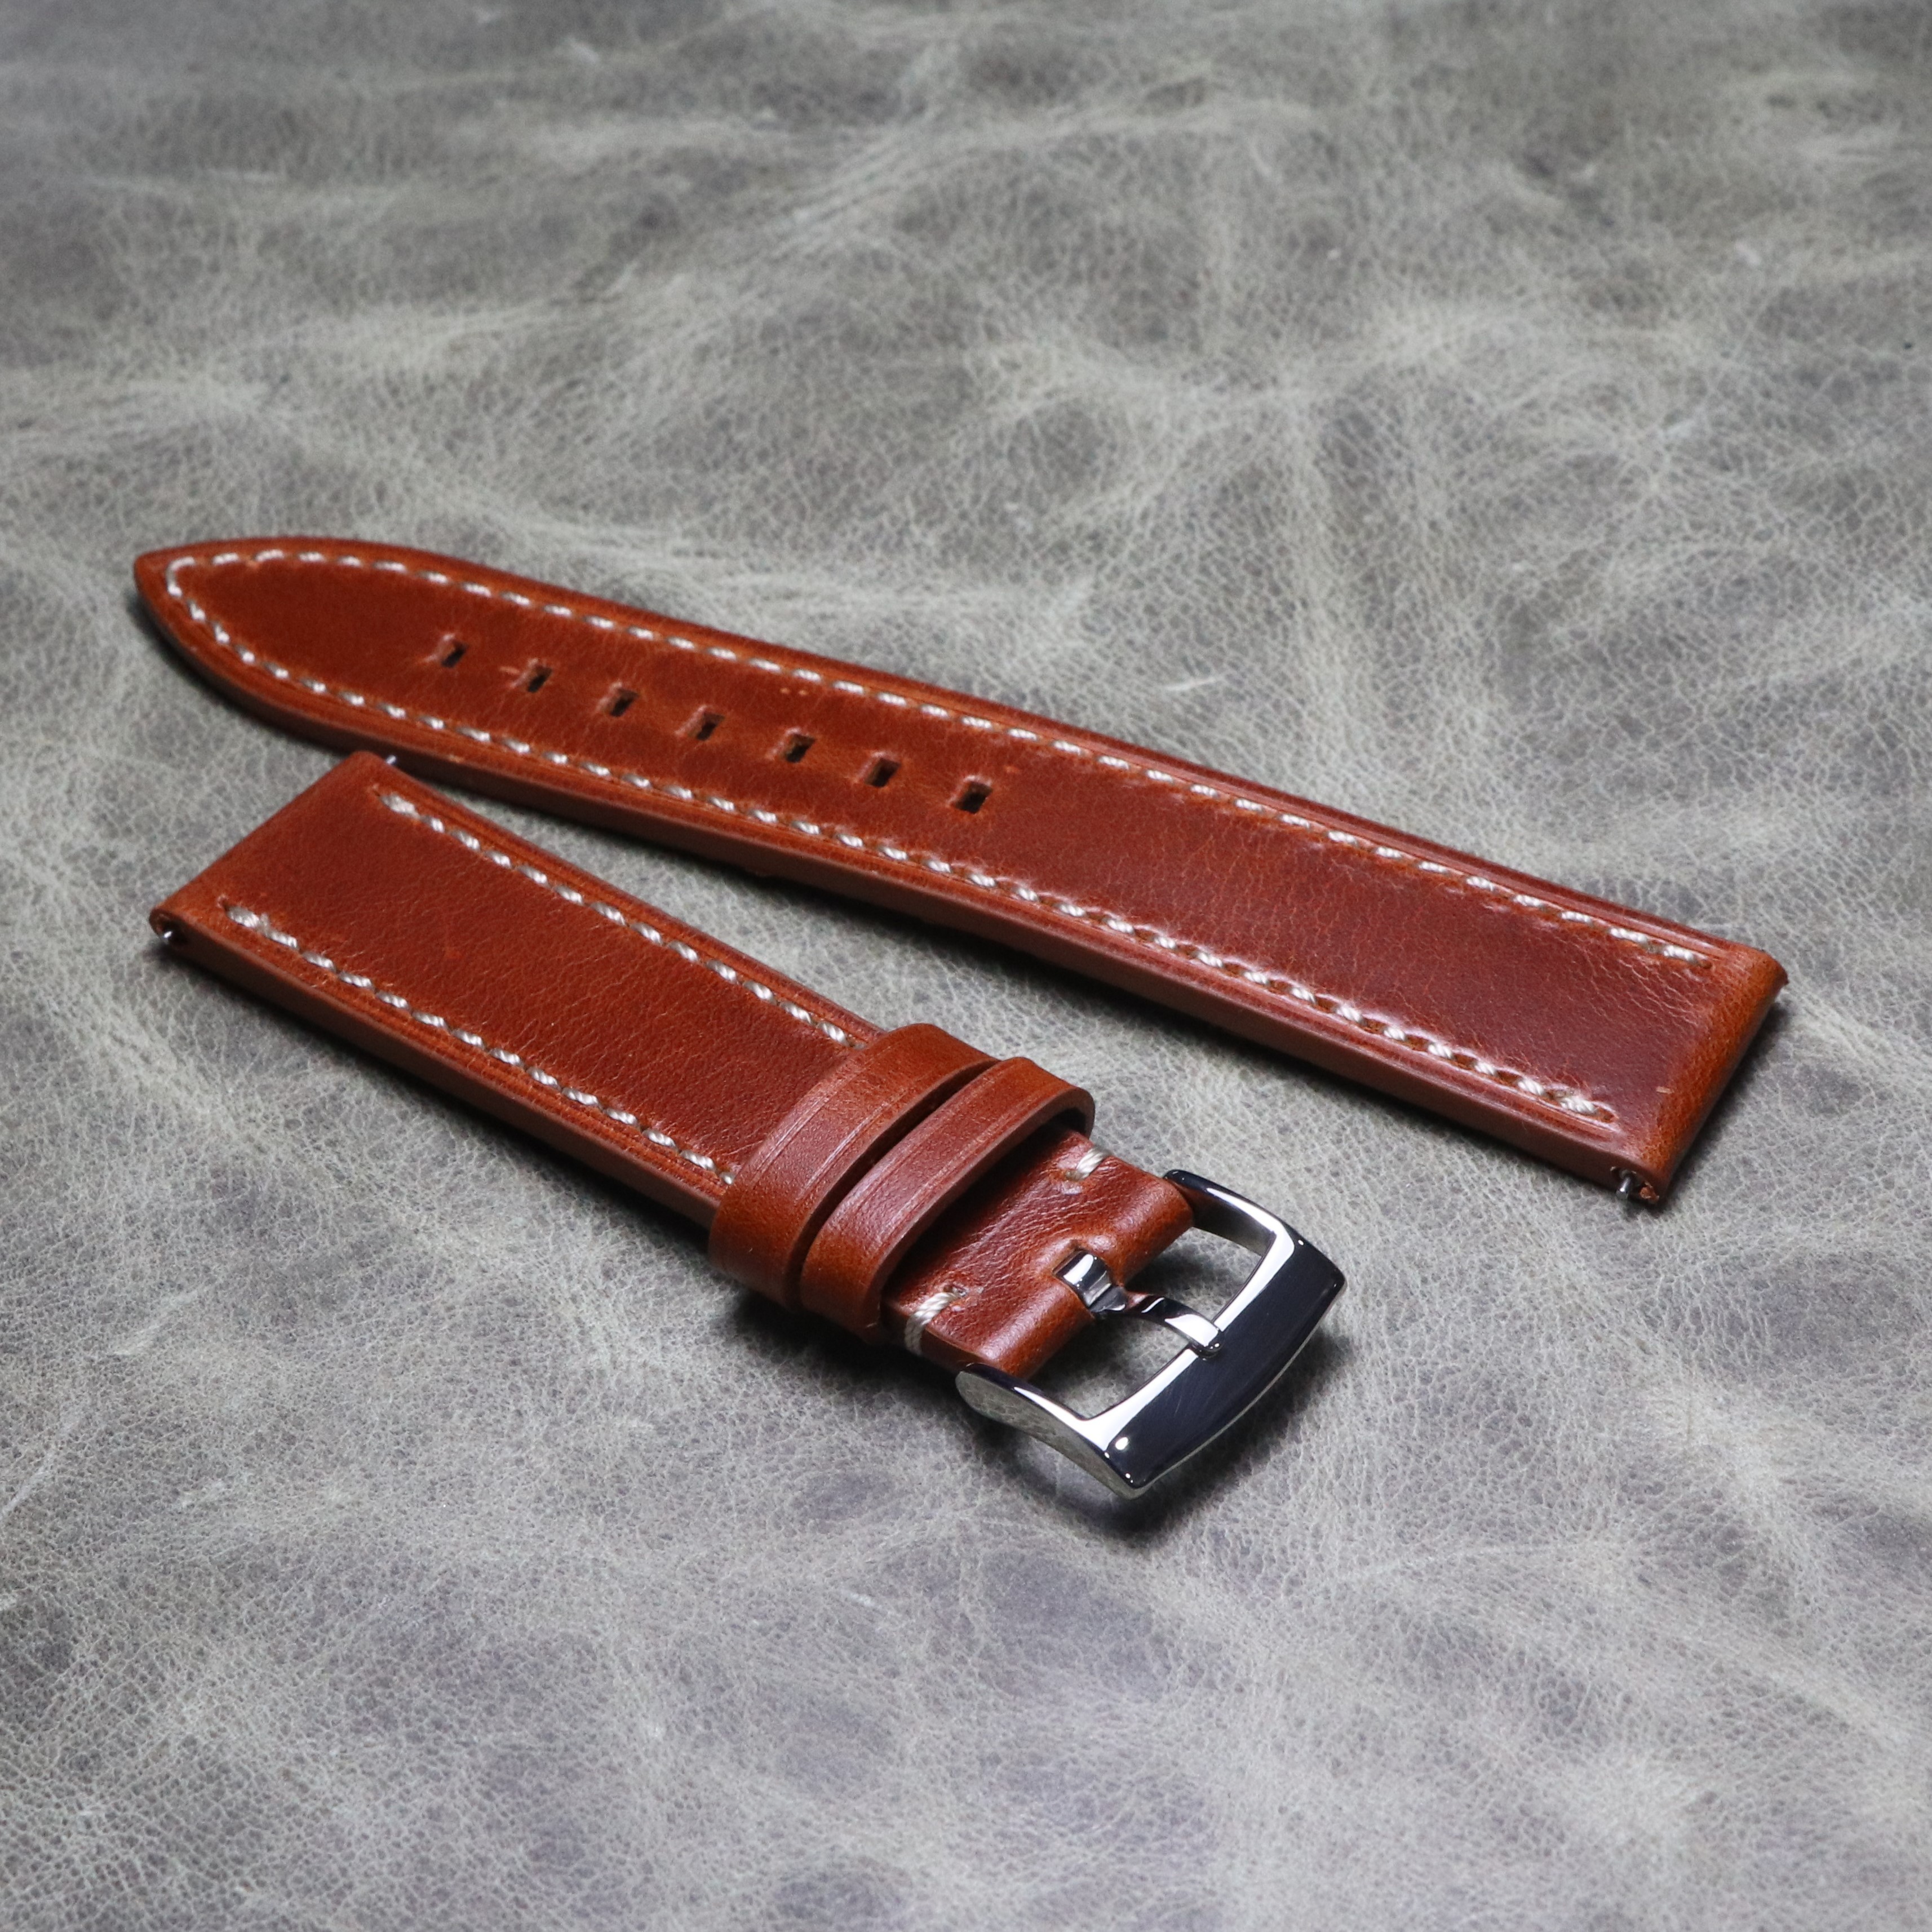 Handmade Crocodile Leather Watchband Soft Genuine Leather Watch Strap 18 20mm High Quality Watch Band Quick Release Wristband Retro